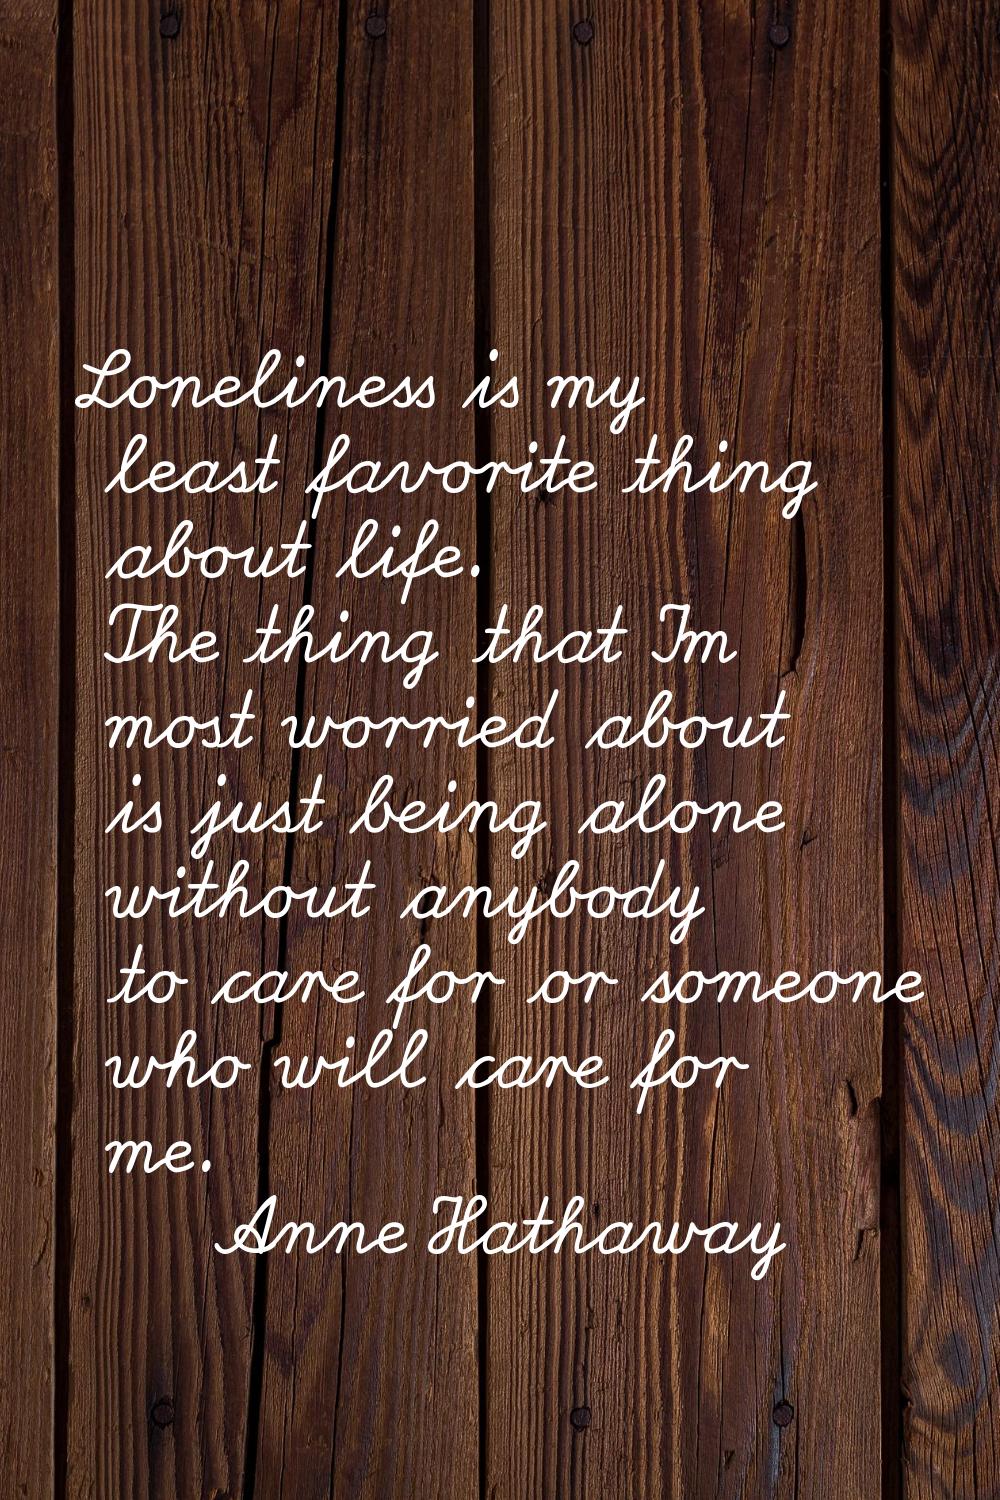 Loneliness is my least favorite thing about life. The thing that I'm most worried about is just bei